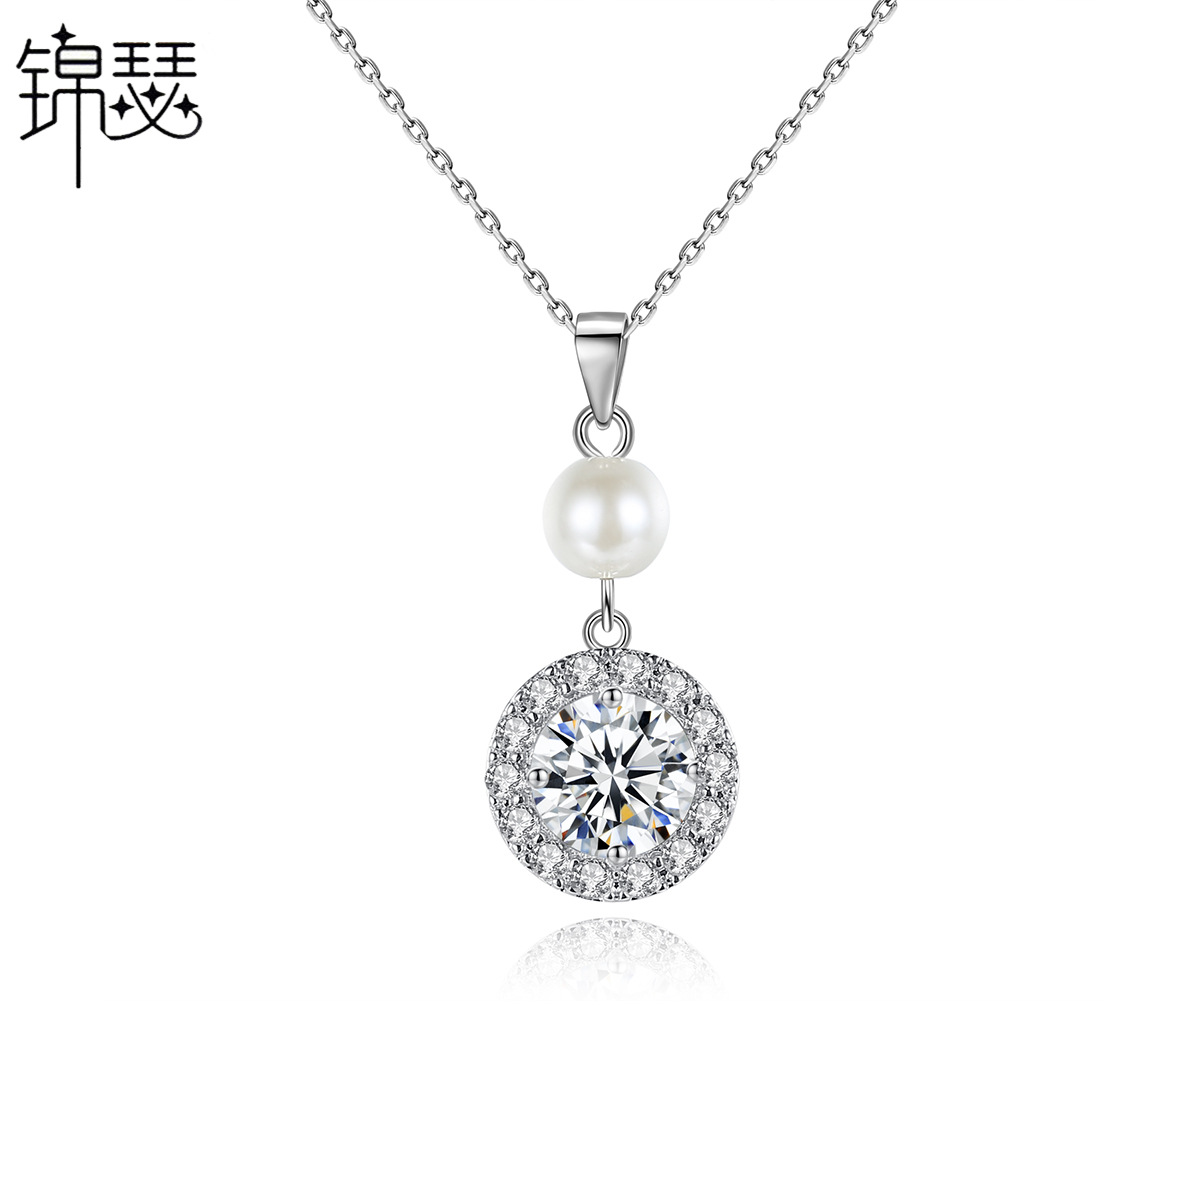 Simple minority pearl pendant round fashion necklace